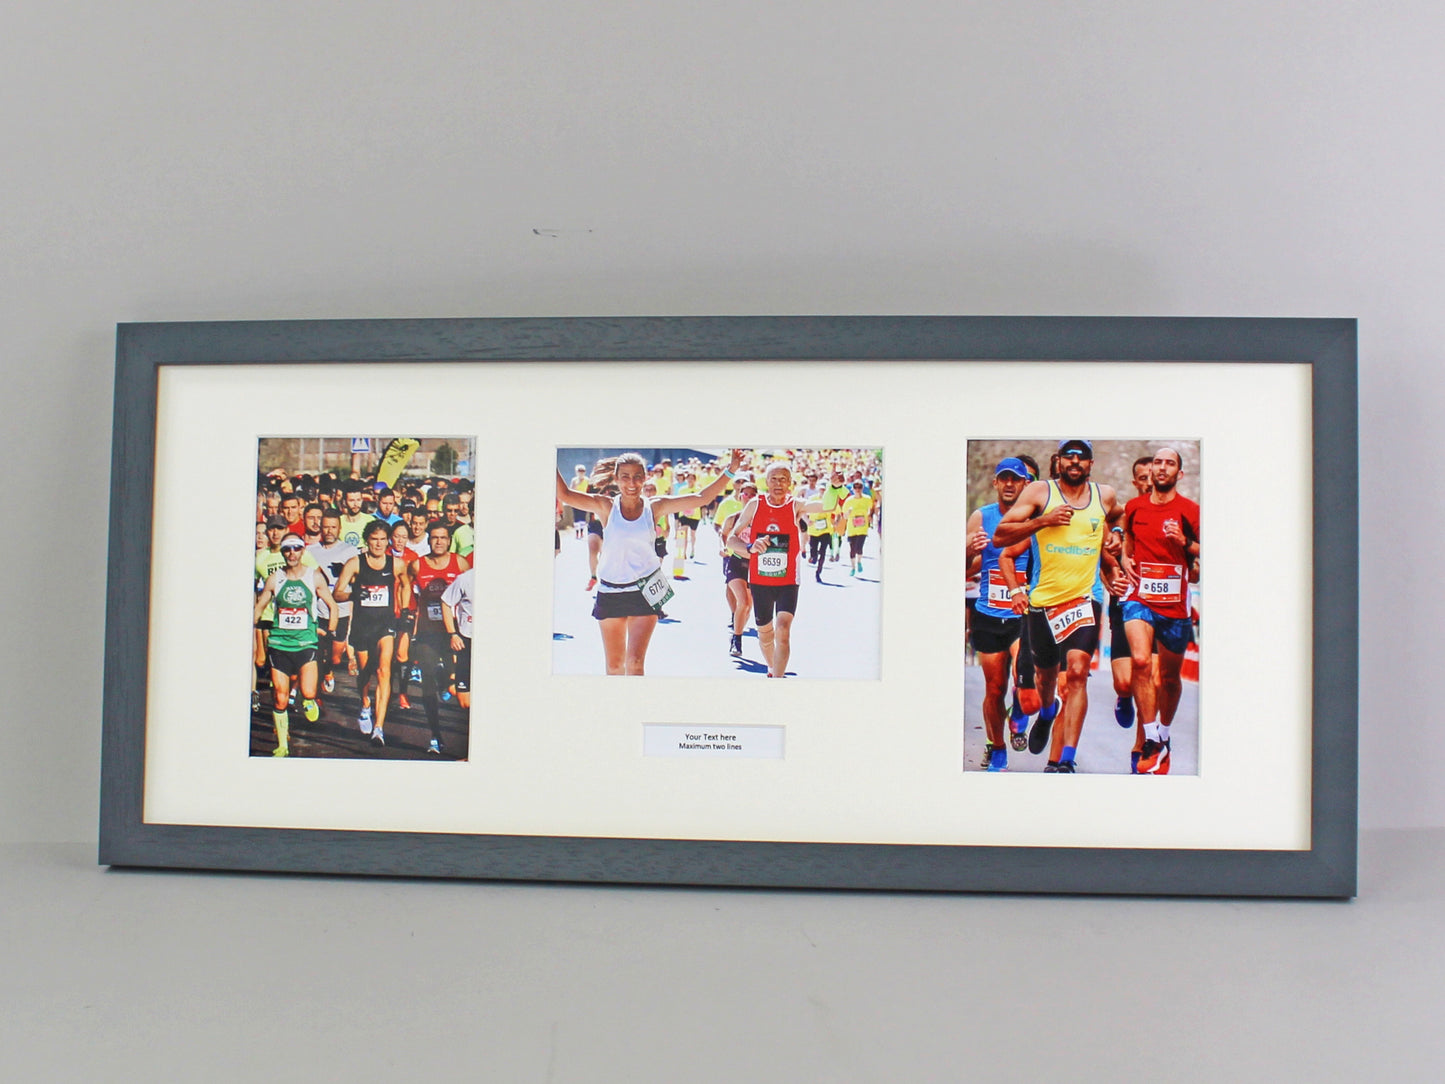 Personalised Multi Aperture frame for Three 5x7" Photos. Mixed Layout. 25x60cm.